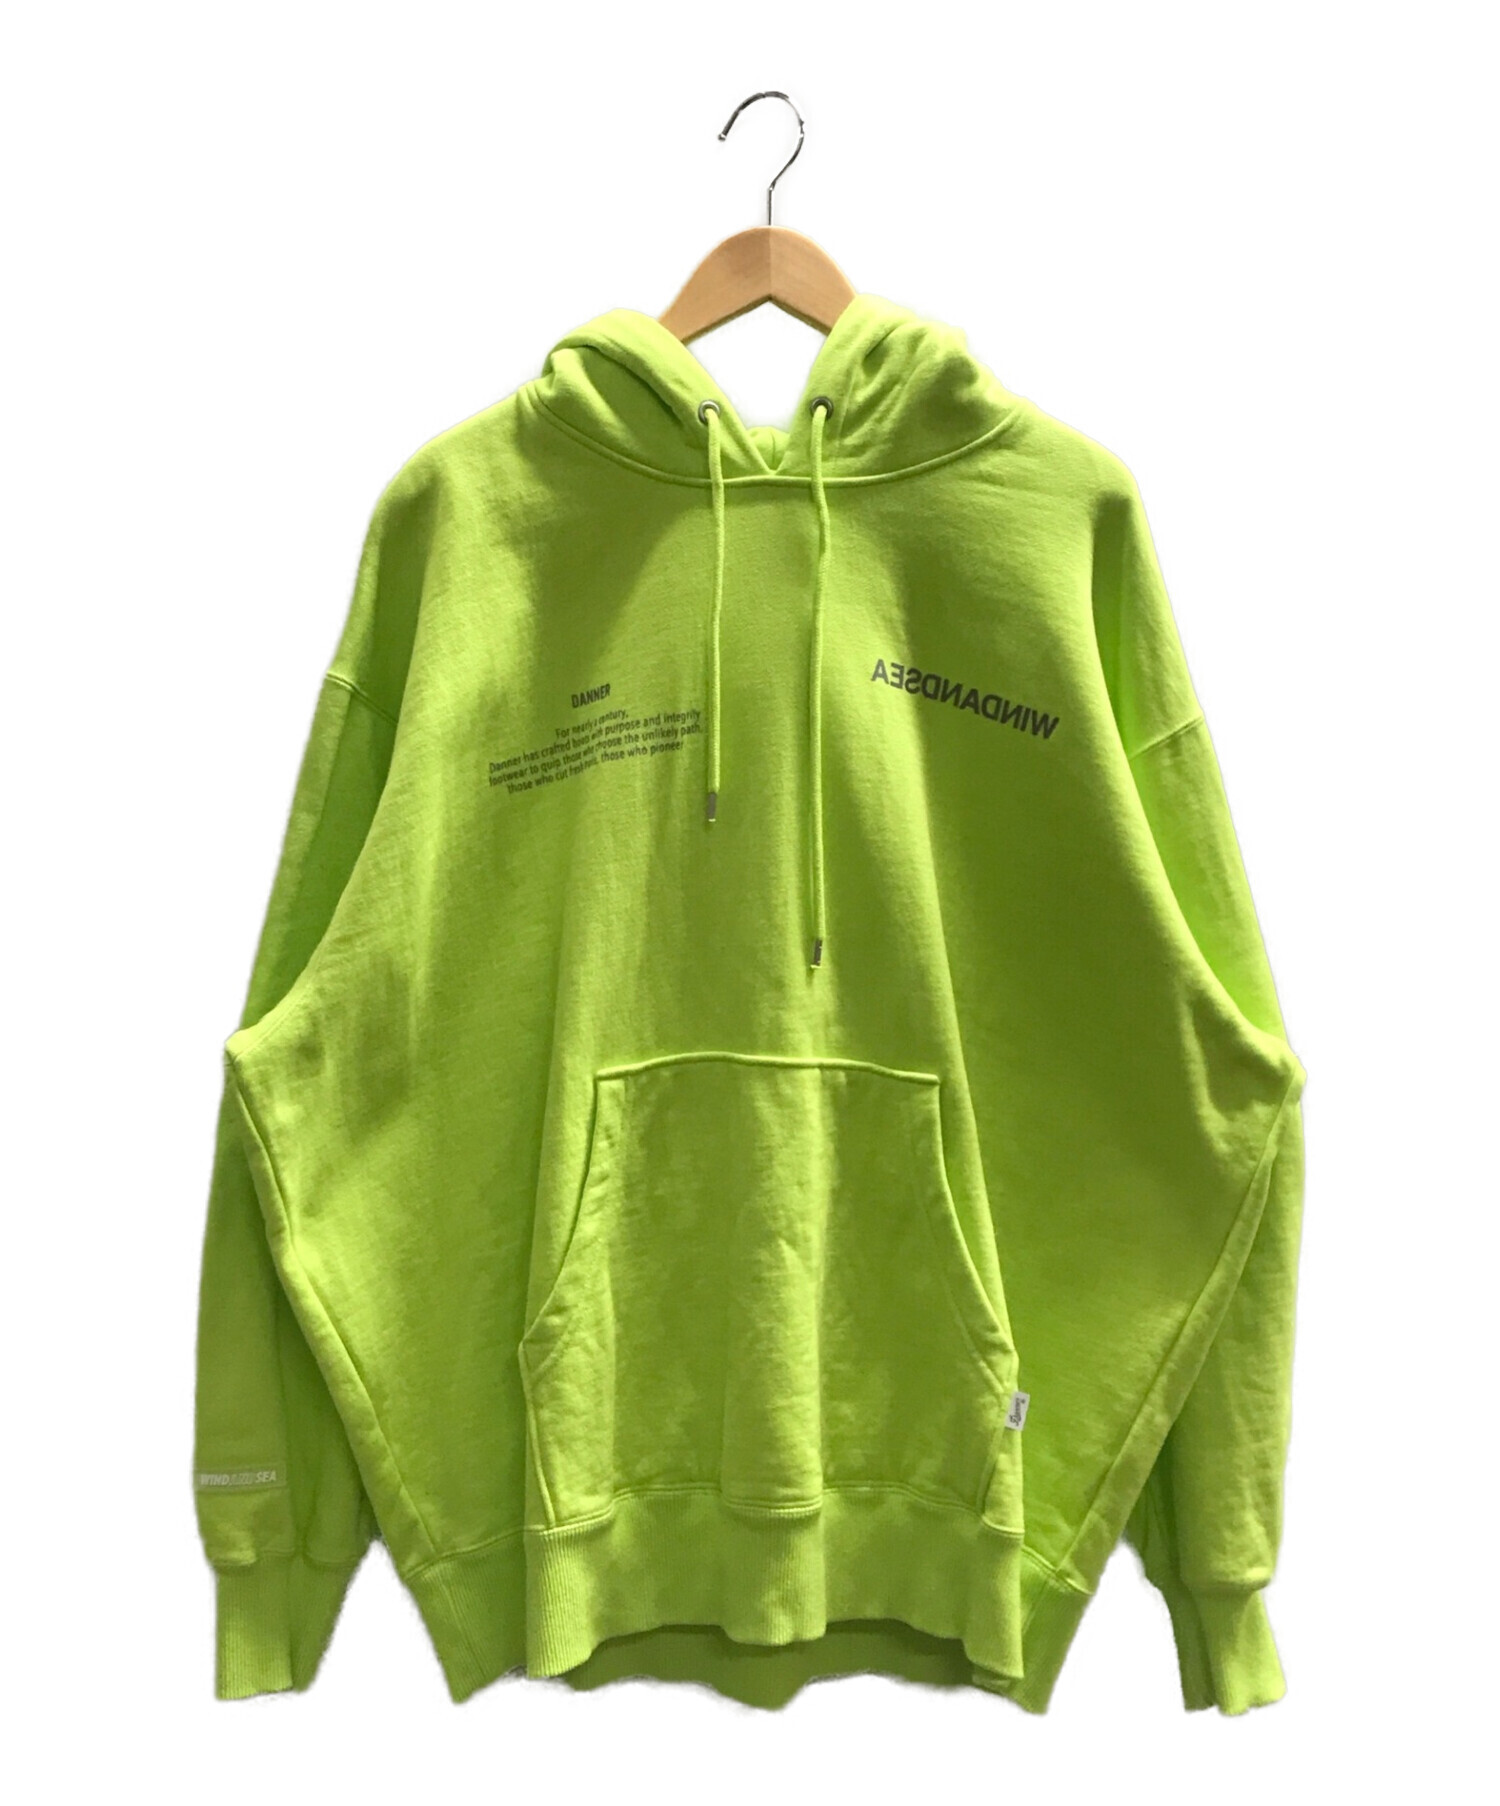 WIND AND SEA パーカー SEA HOODIE イエローL